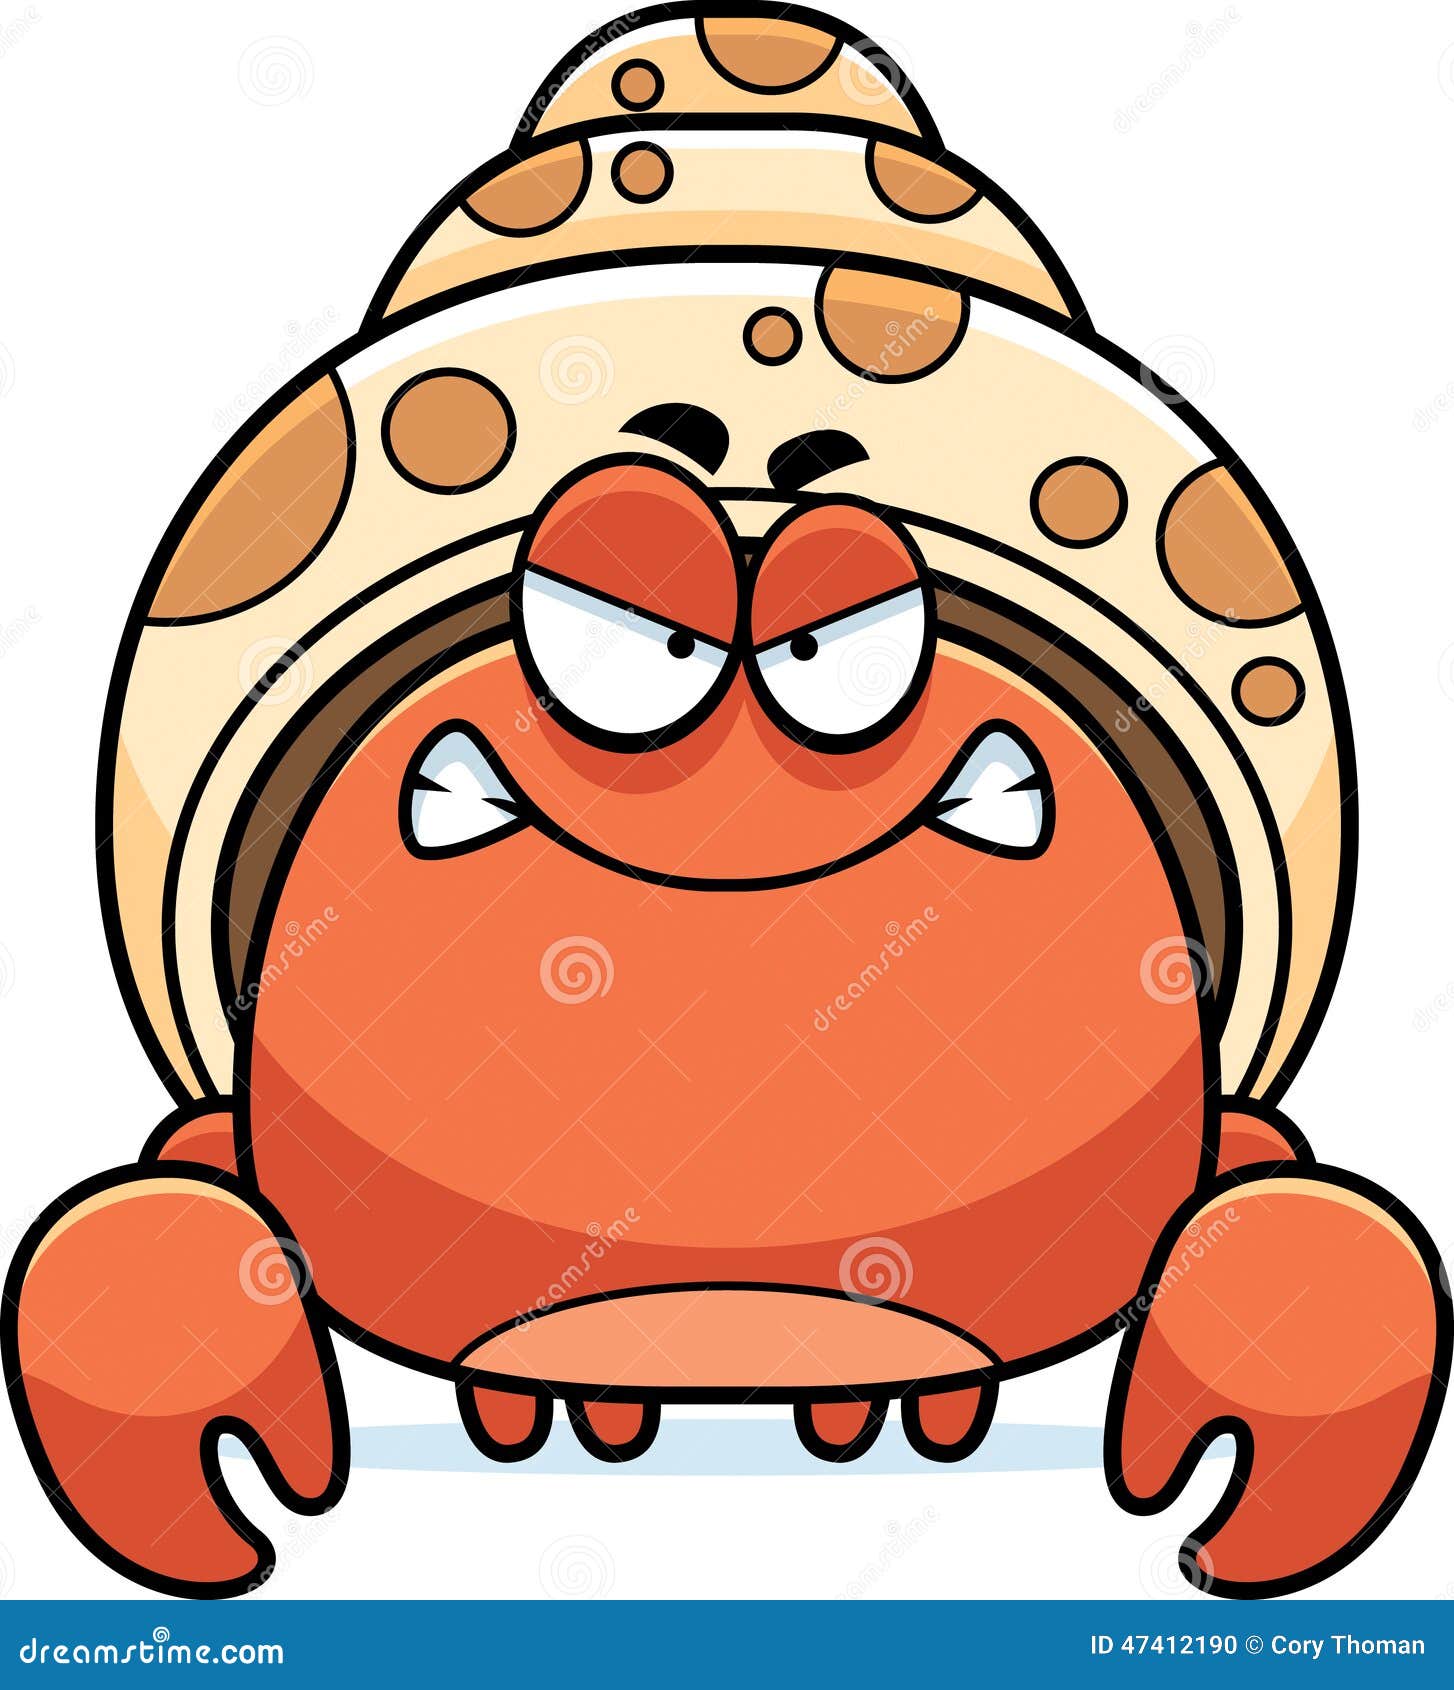 Angry Little Hermit Crab stock vector. Illustration of cartoon - 47412190